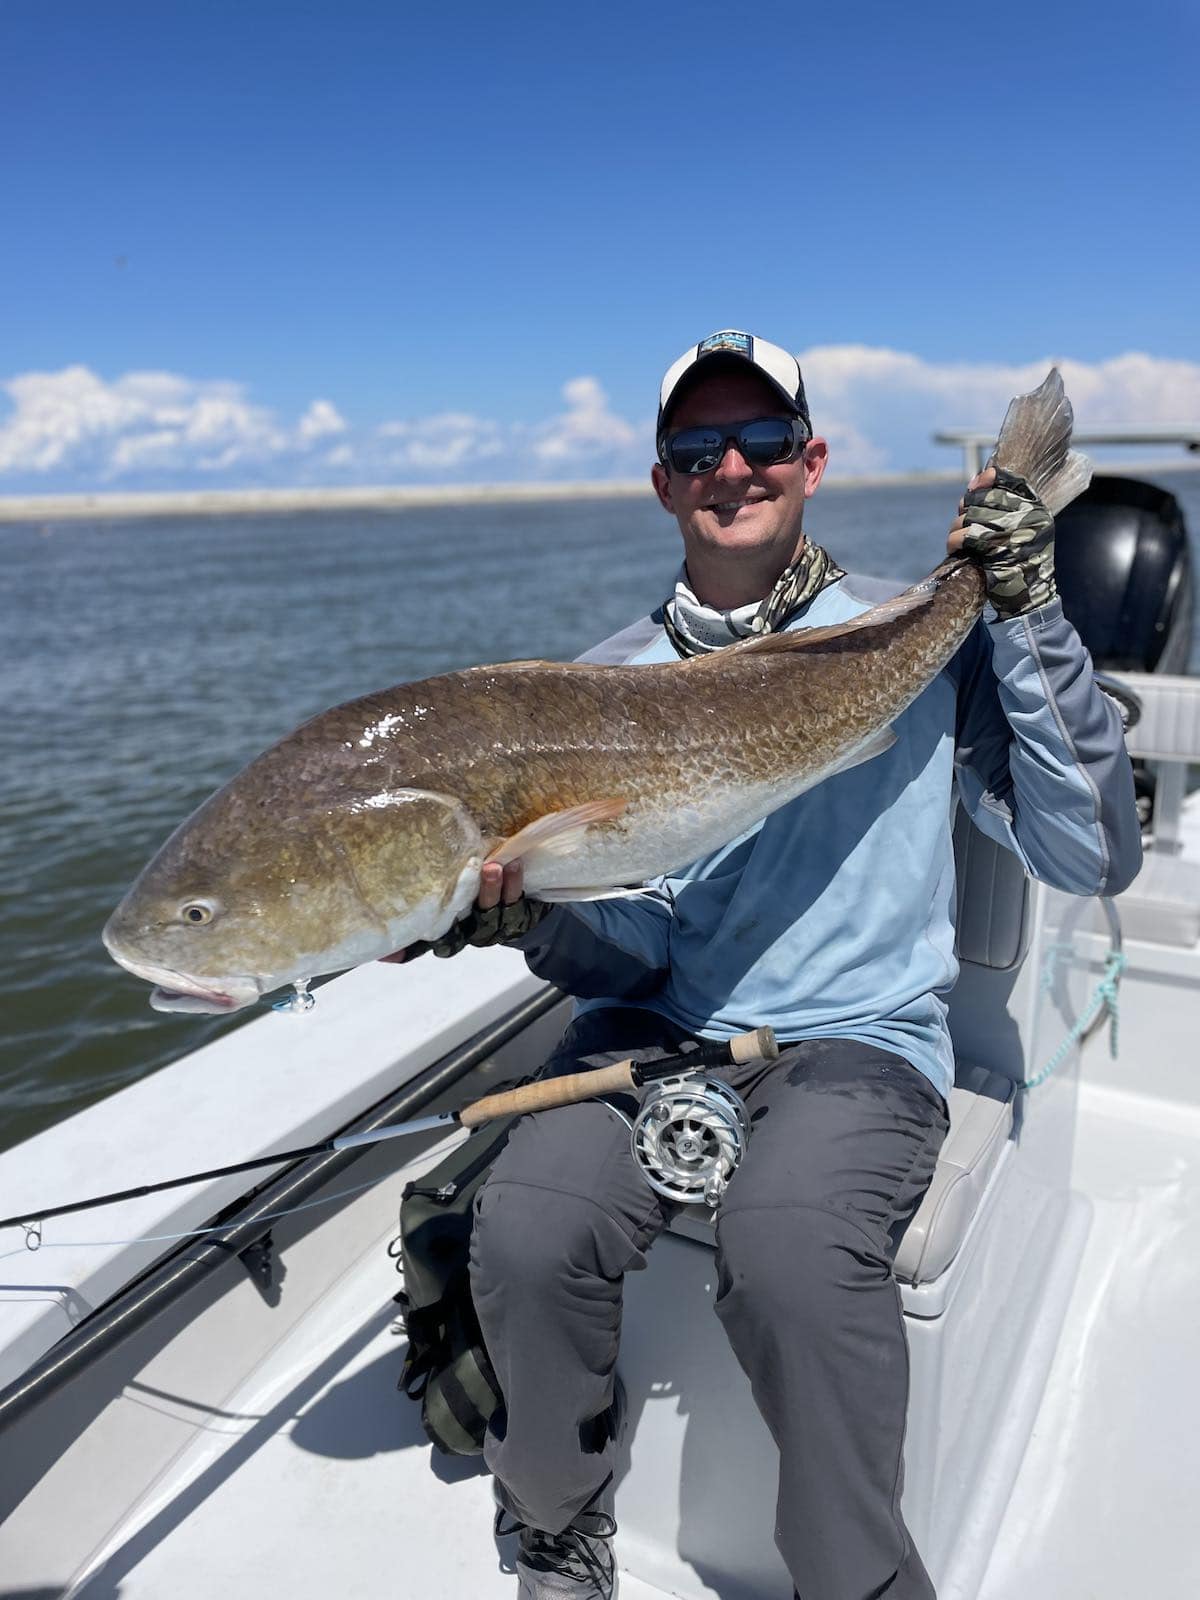 Giant redfish caught on fly rod in gulf of mexico